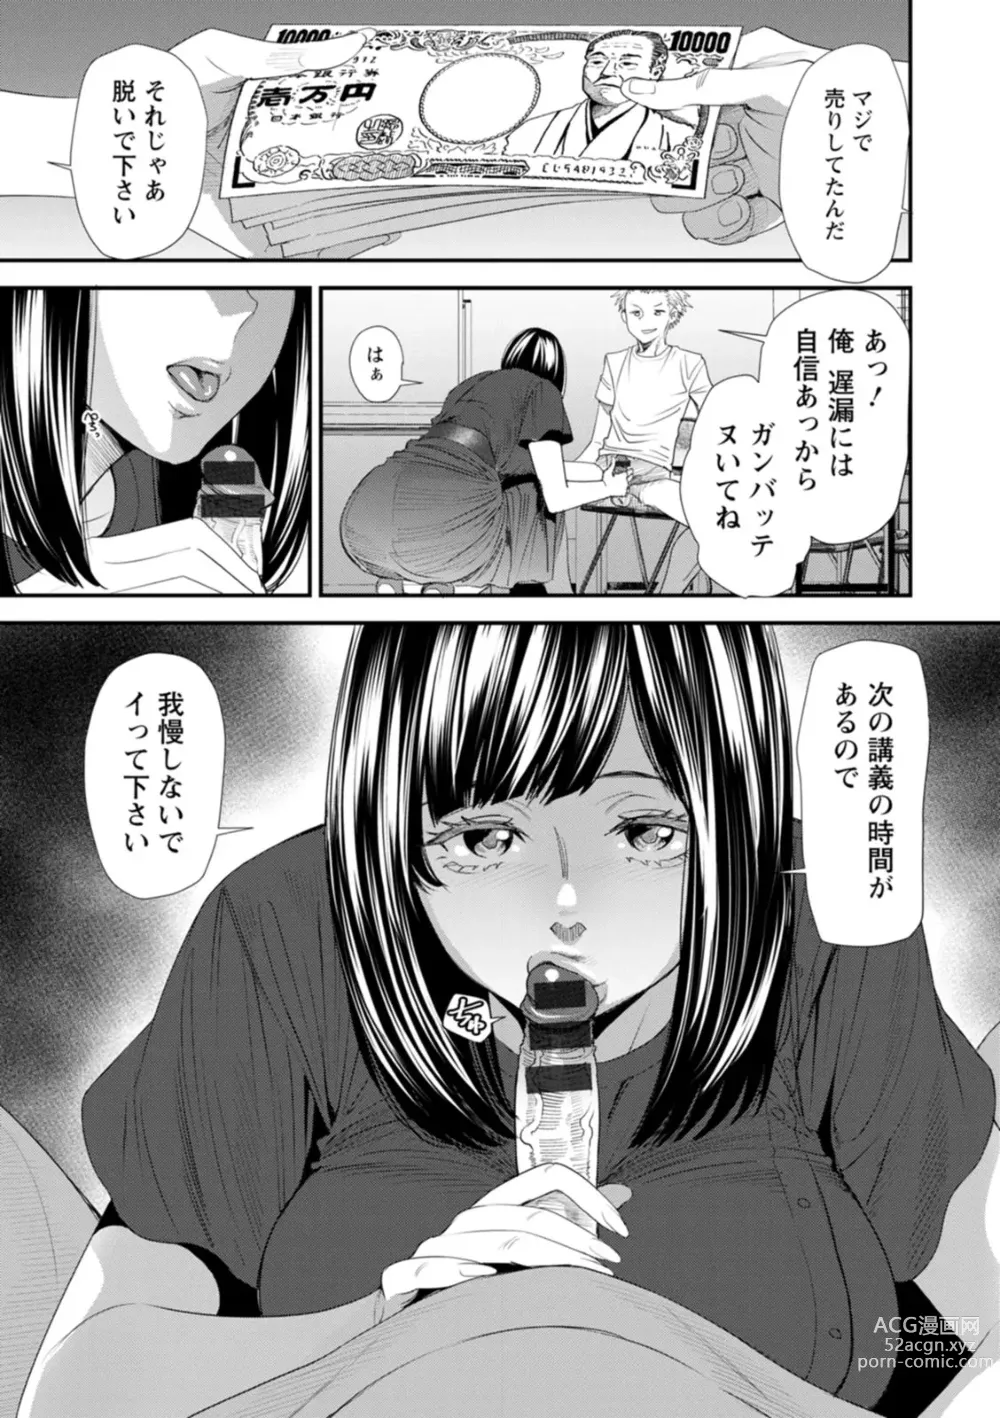 Page 13 of manga Inma Joshi Daisei no Yuuutsu - The Melancholy of the Succubus who is a college student